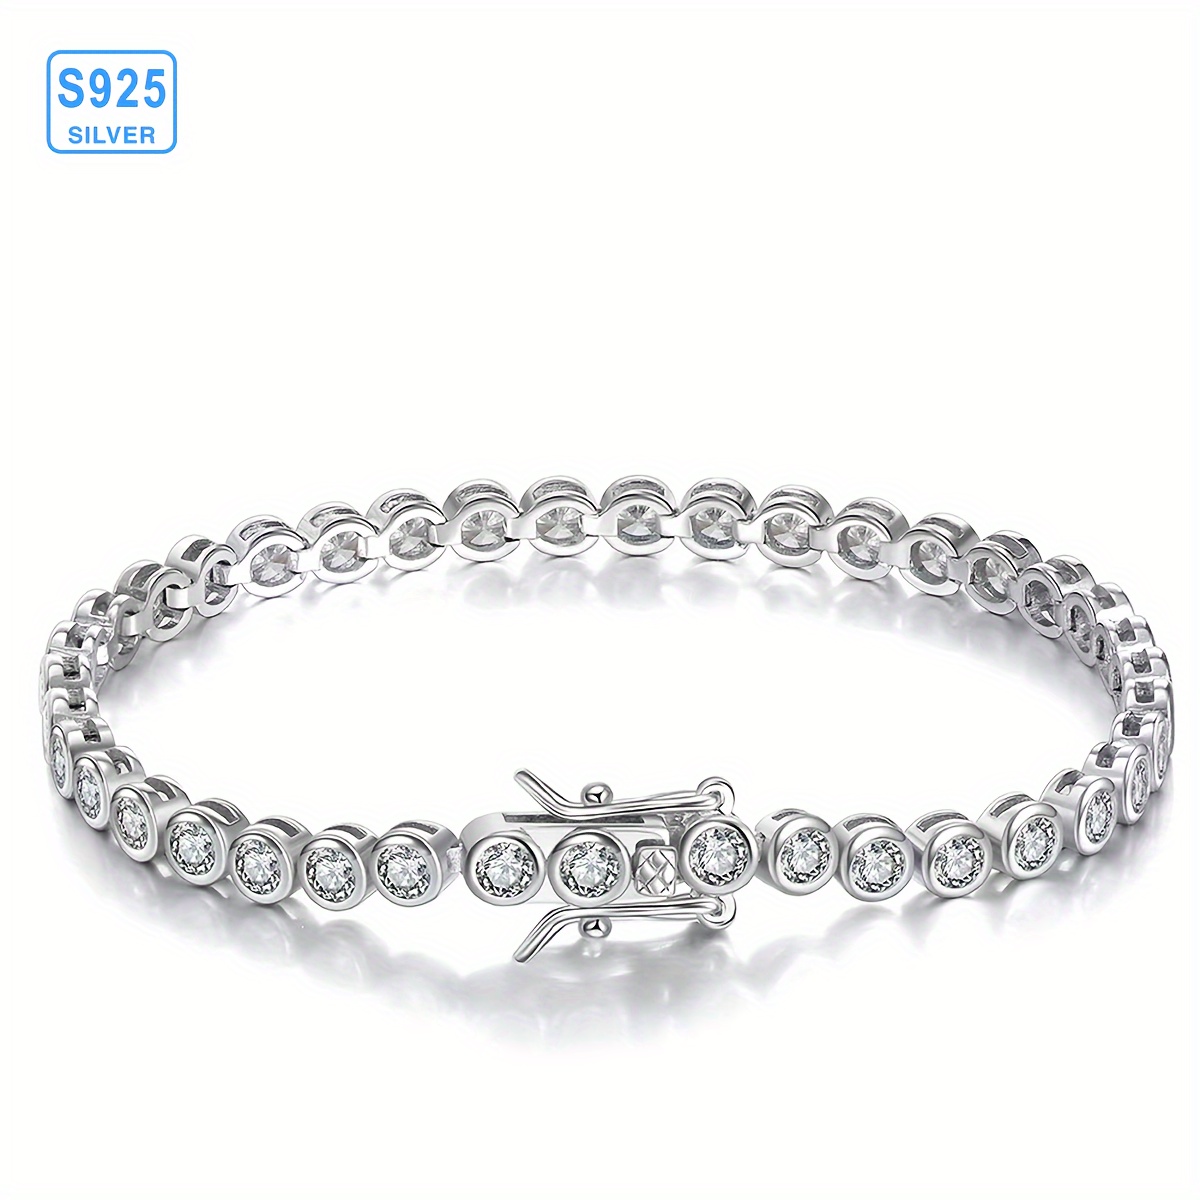 

1pc S925 Sterling Silver With Moissanite Tennis Bracelet For Men & Women, Birthday Gifts, Wedding, Anniversary, Engagement Jewelry